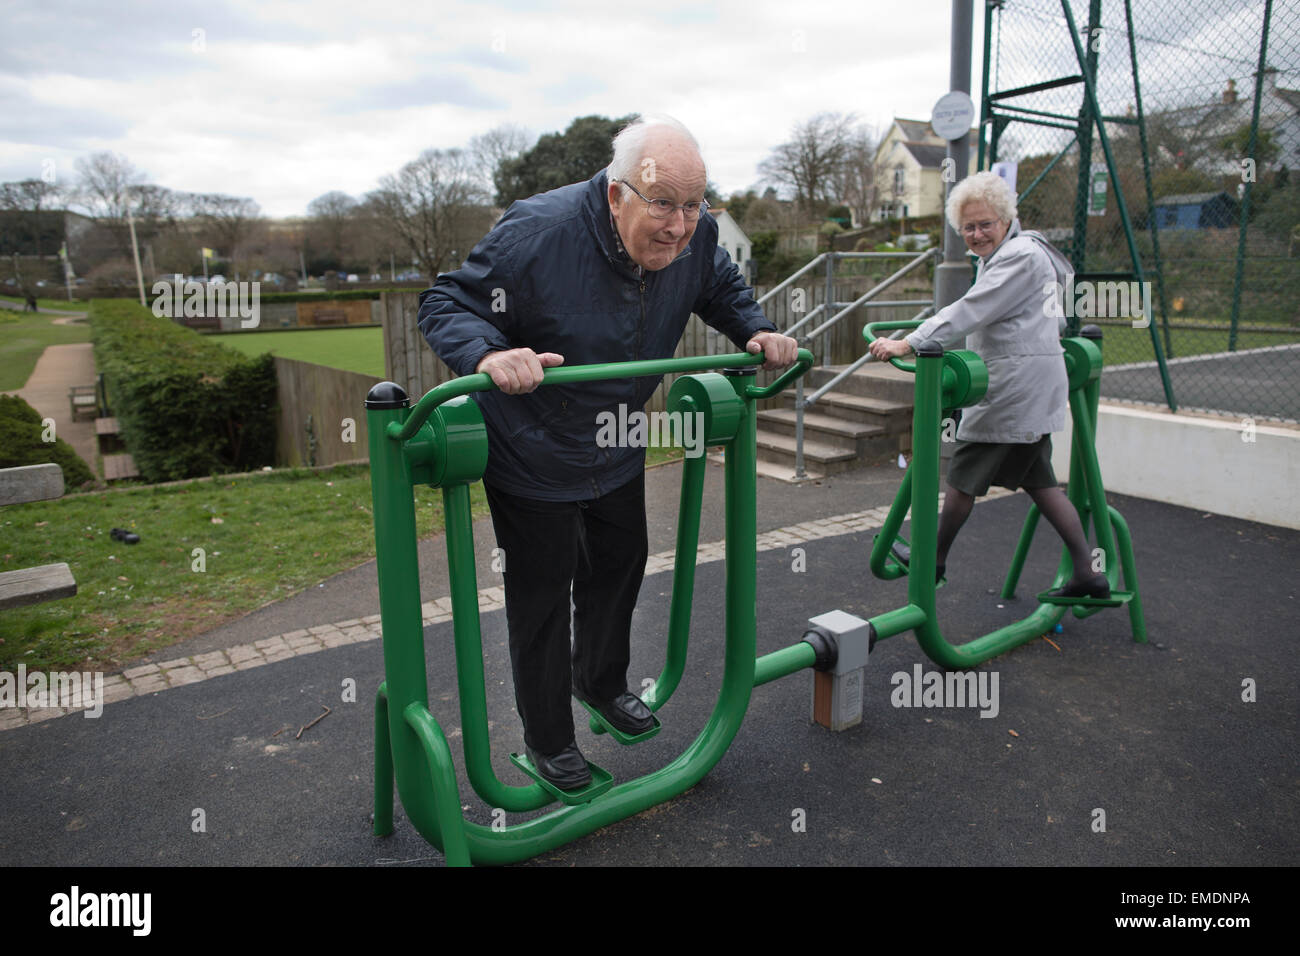 Elderly couple in their late 70's (her) and early 80's (him) exercising on outdoor fitness equipment, Kingsbridge, Devon, UK Stock Photo